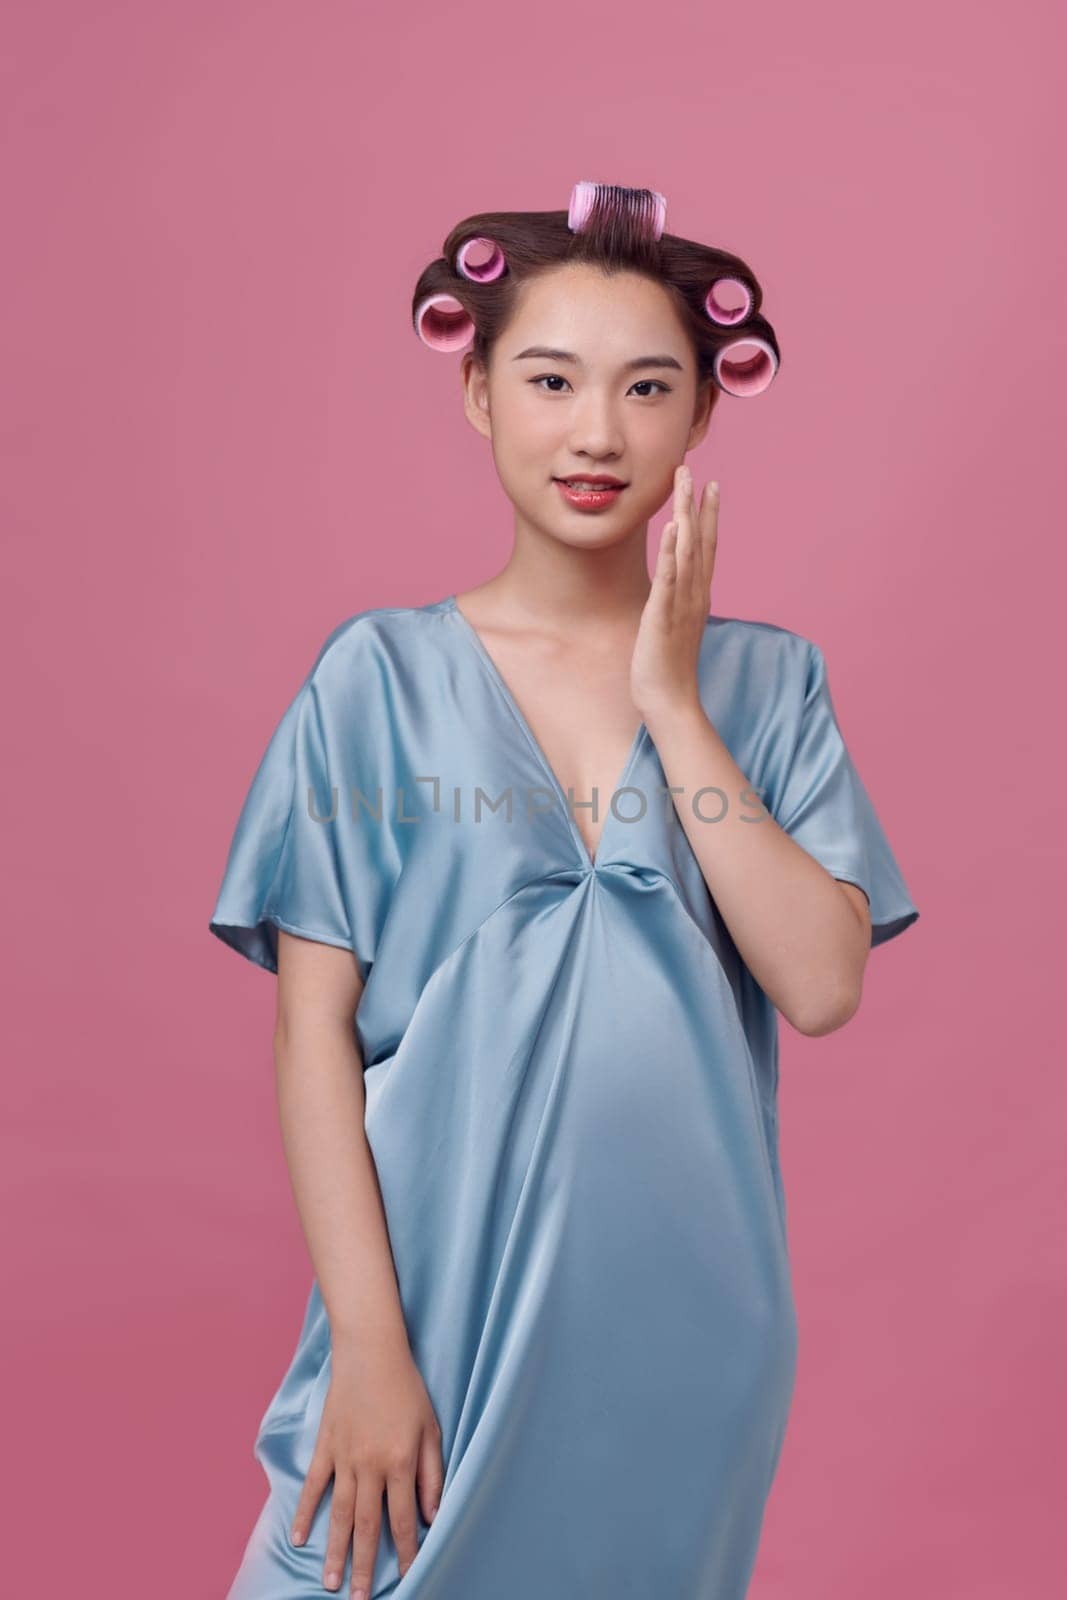 beautiful asian woman with a curler in her hair